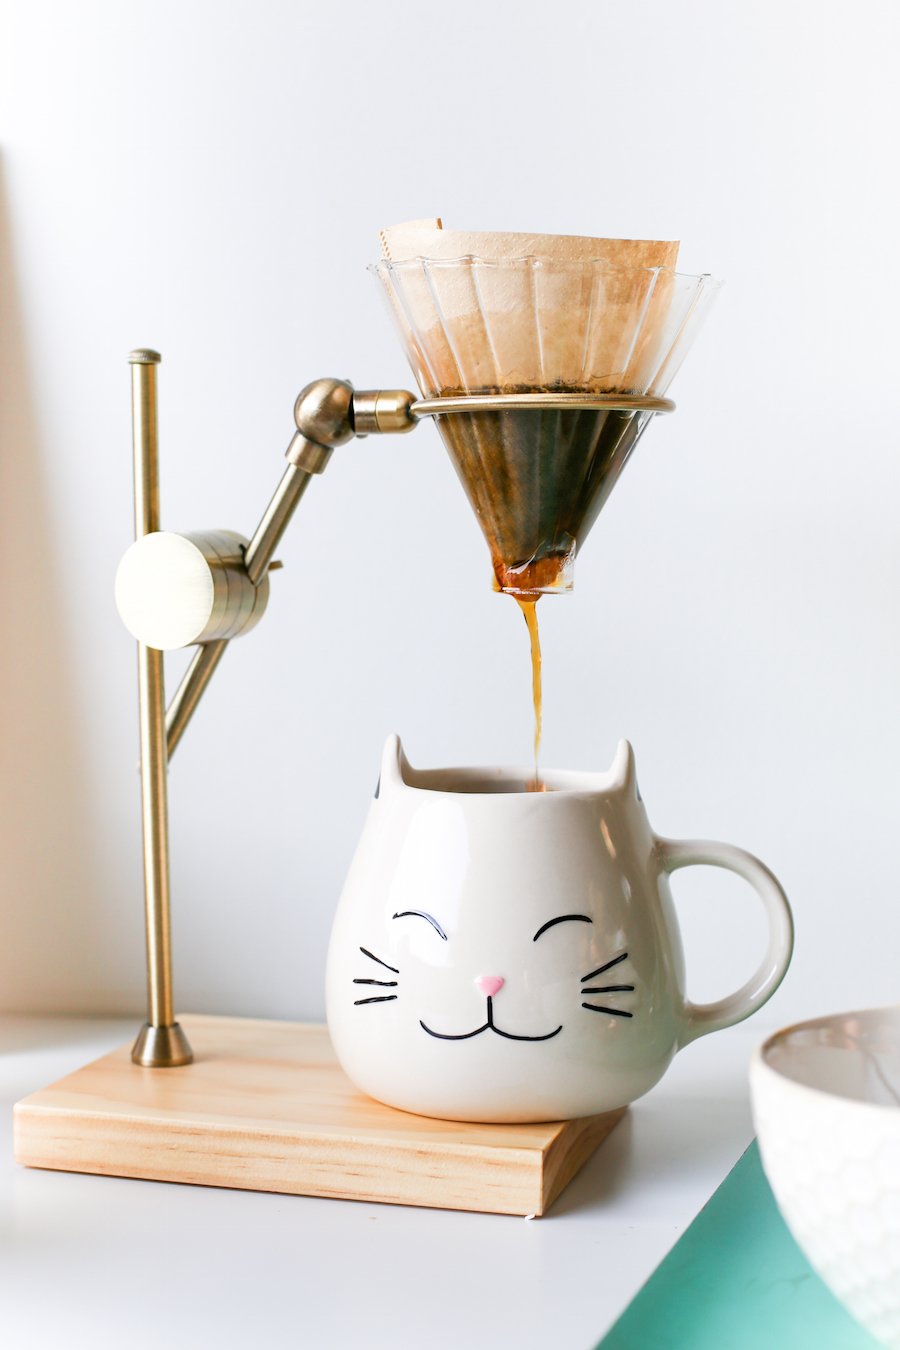 Set up a coffee station for your visiting friends and family so they feel right at home! // saltycanary.com